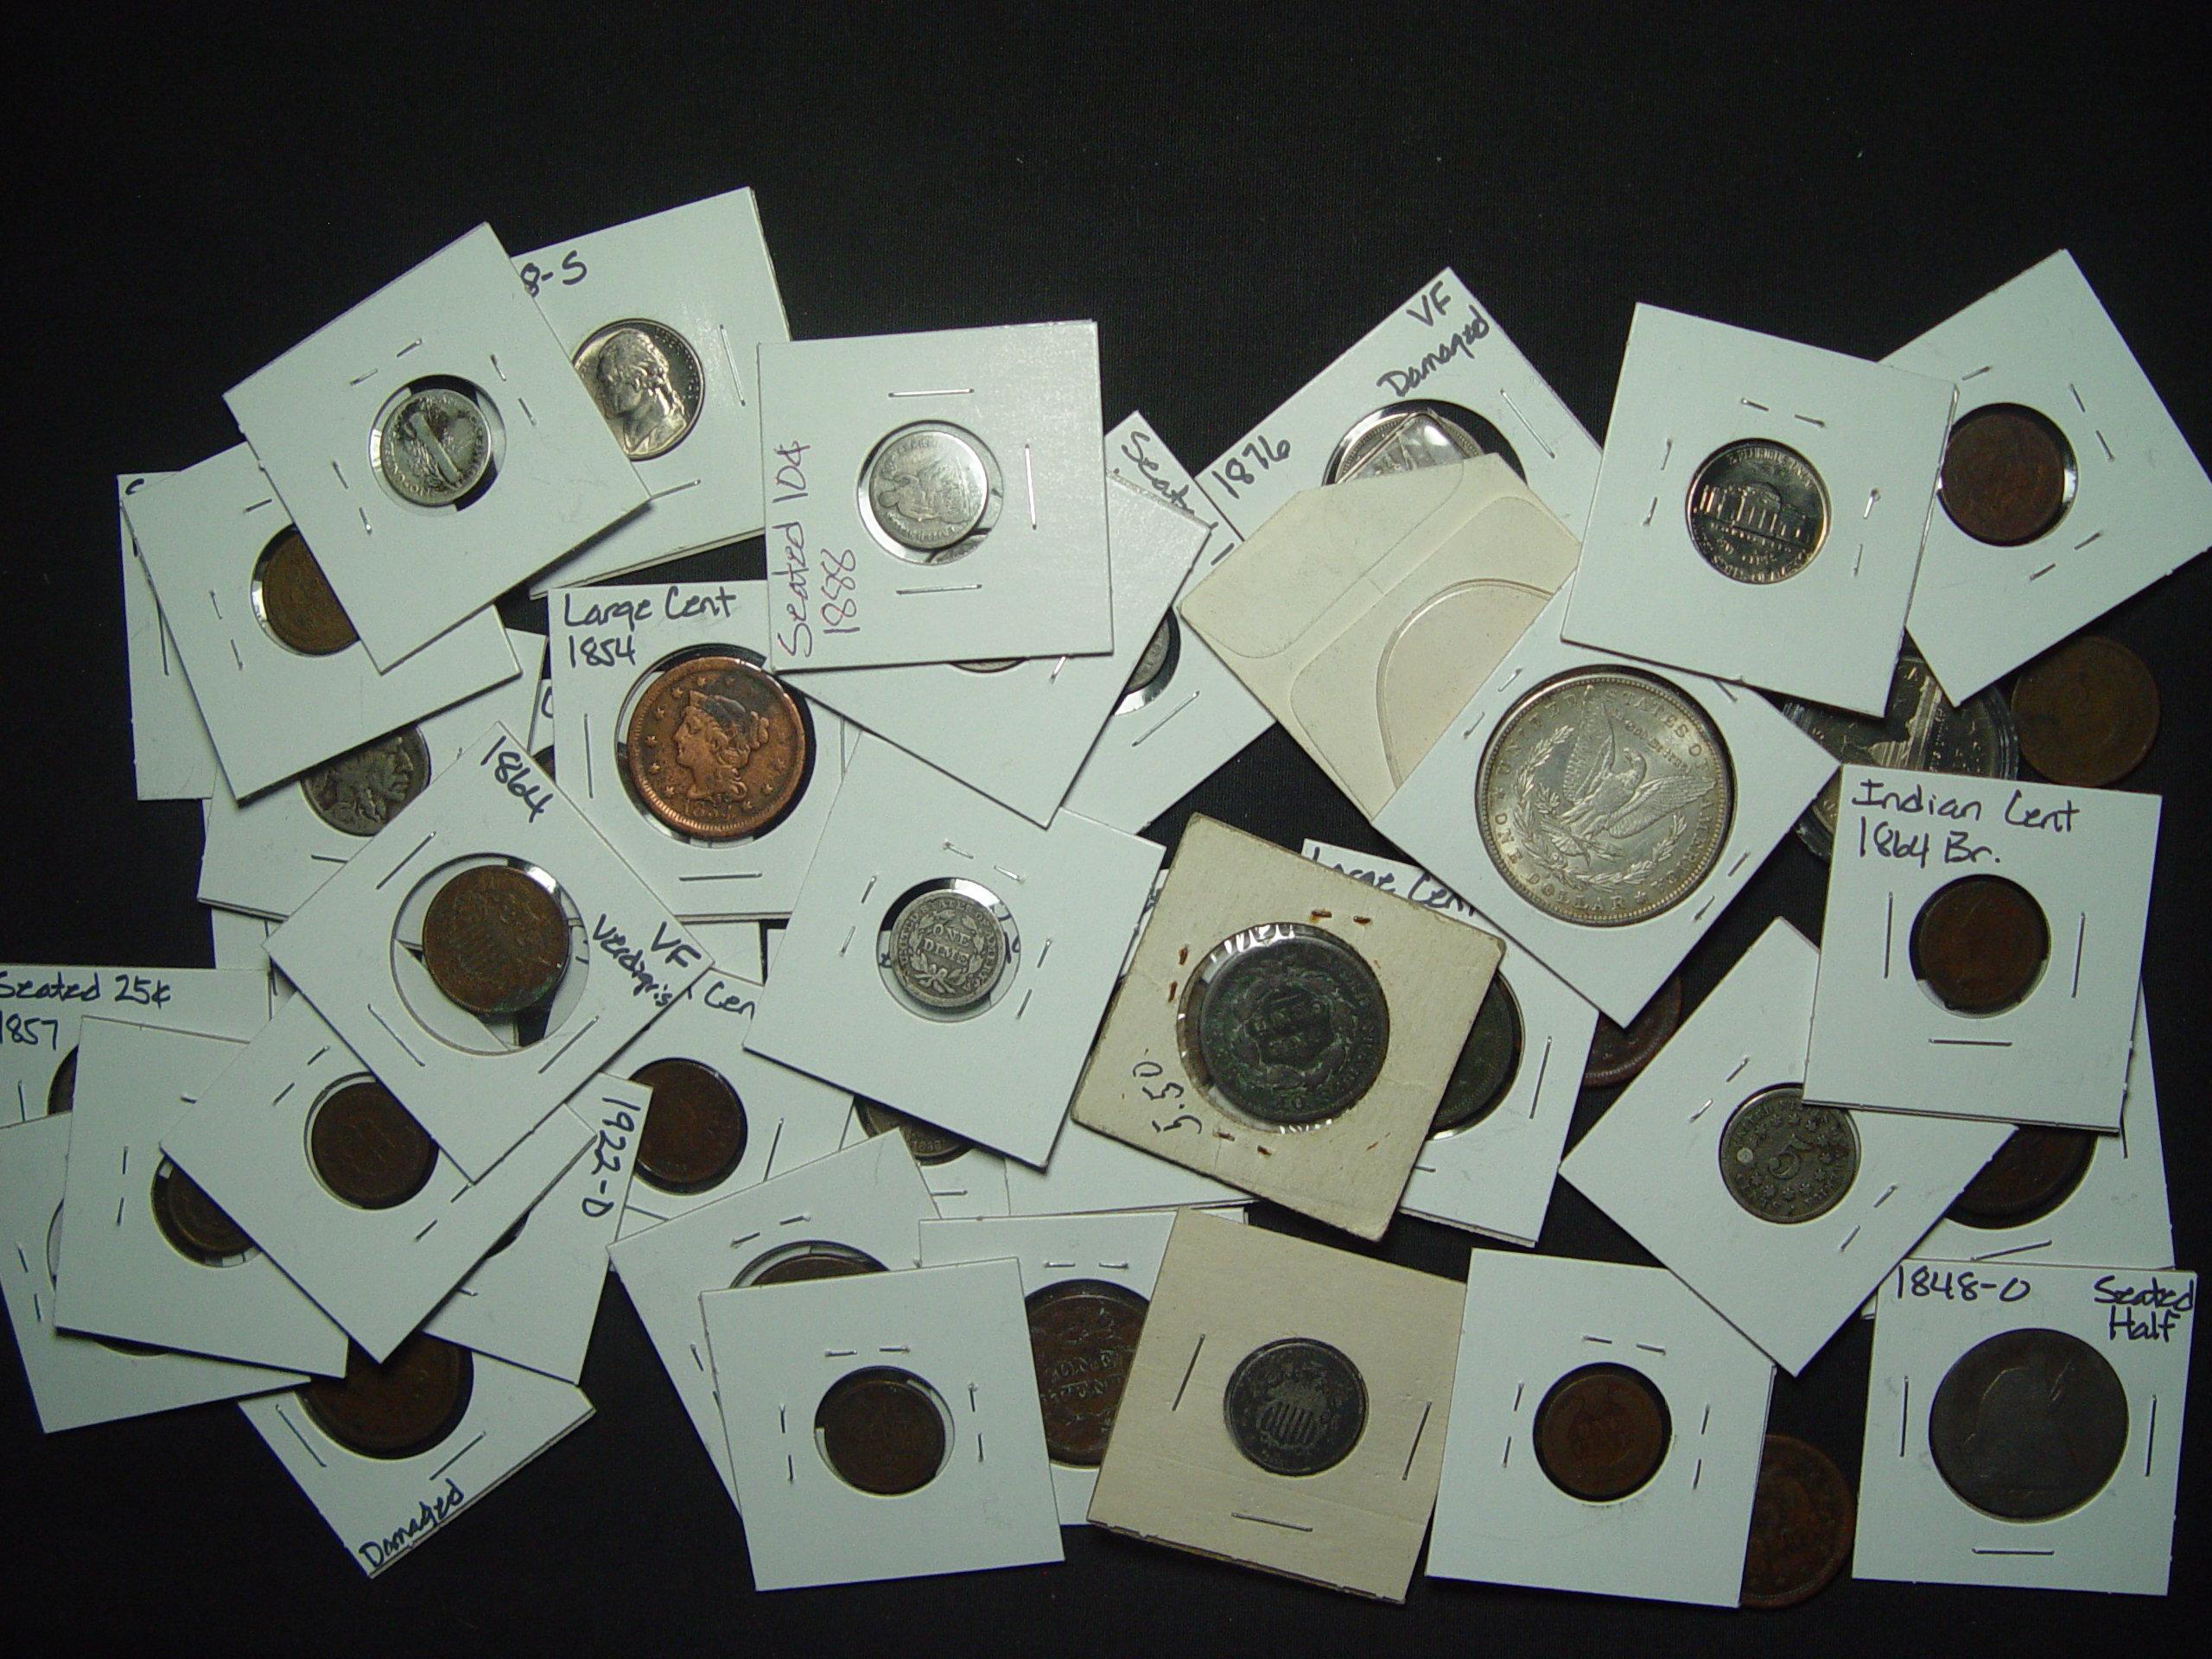 Bag of 50 Obsolete U.S. Coins- Most with condition issues